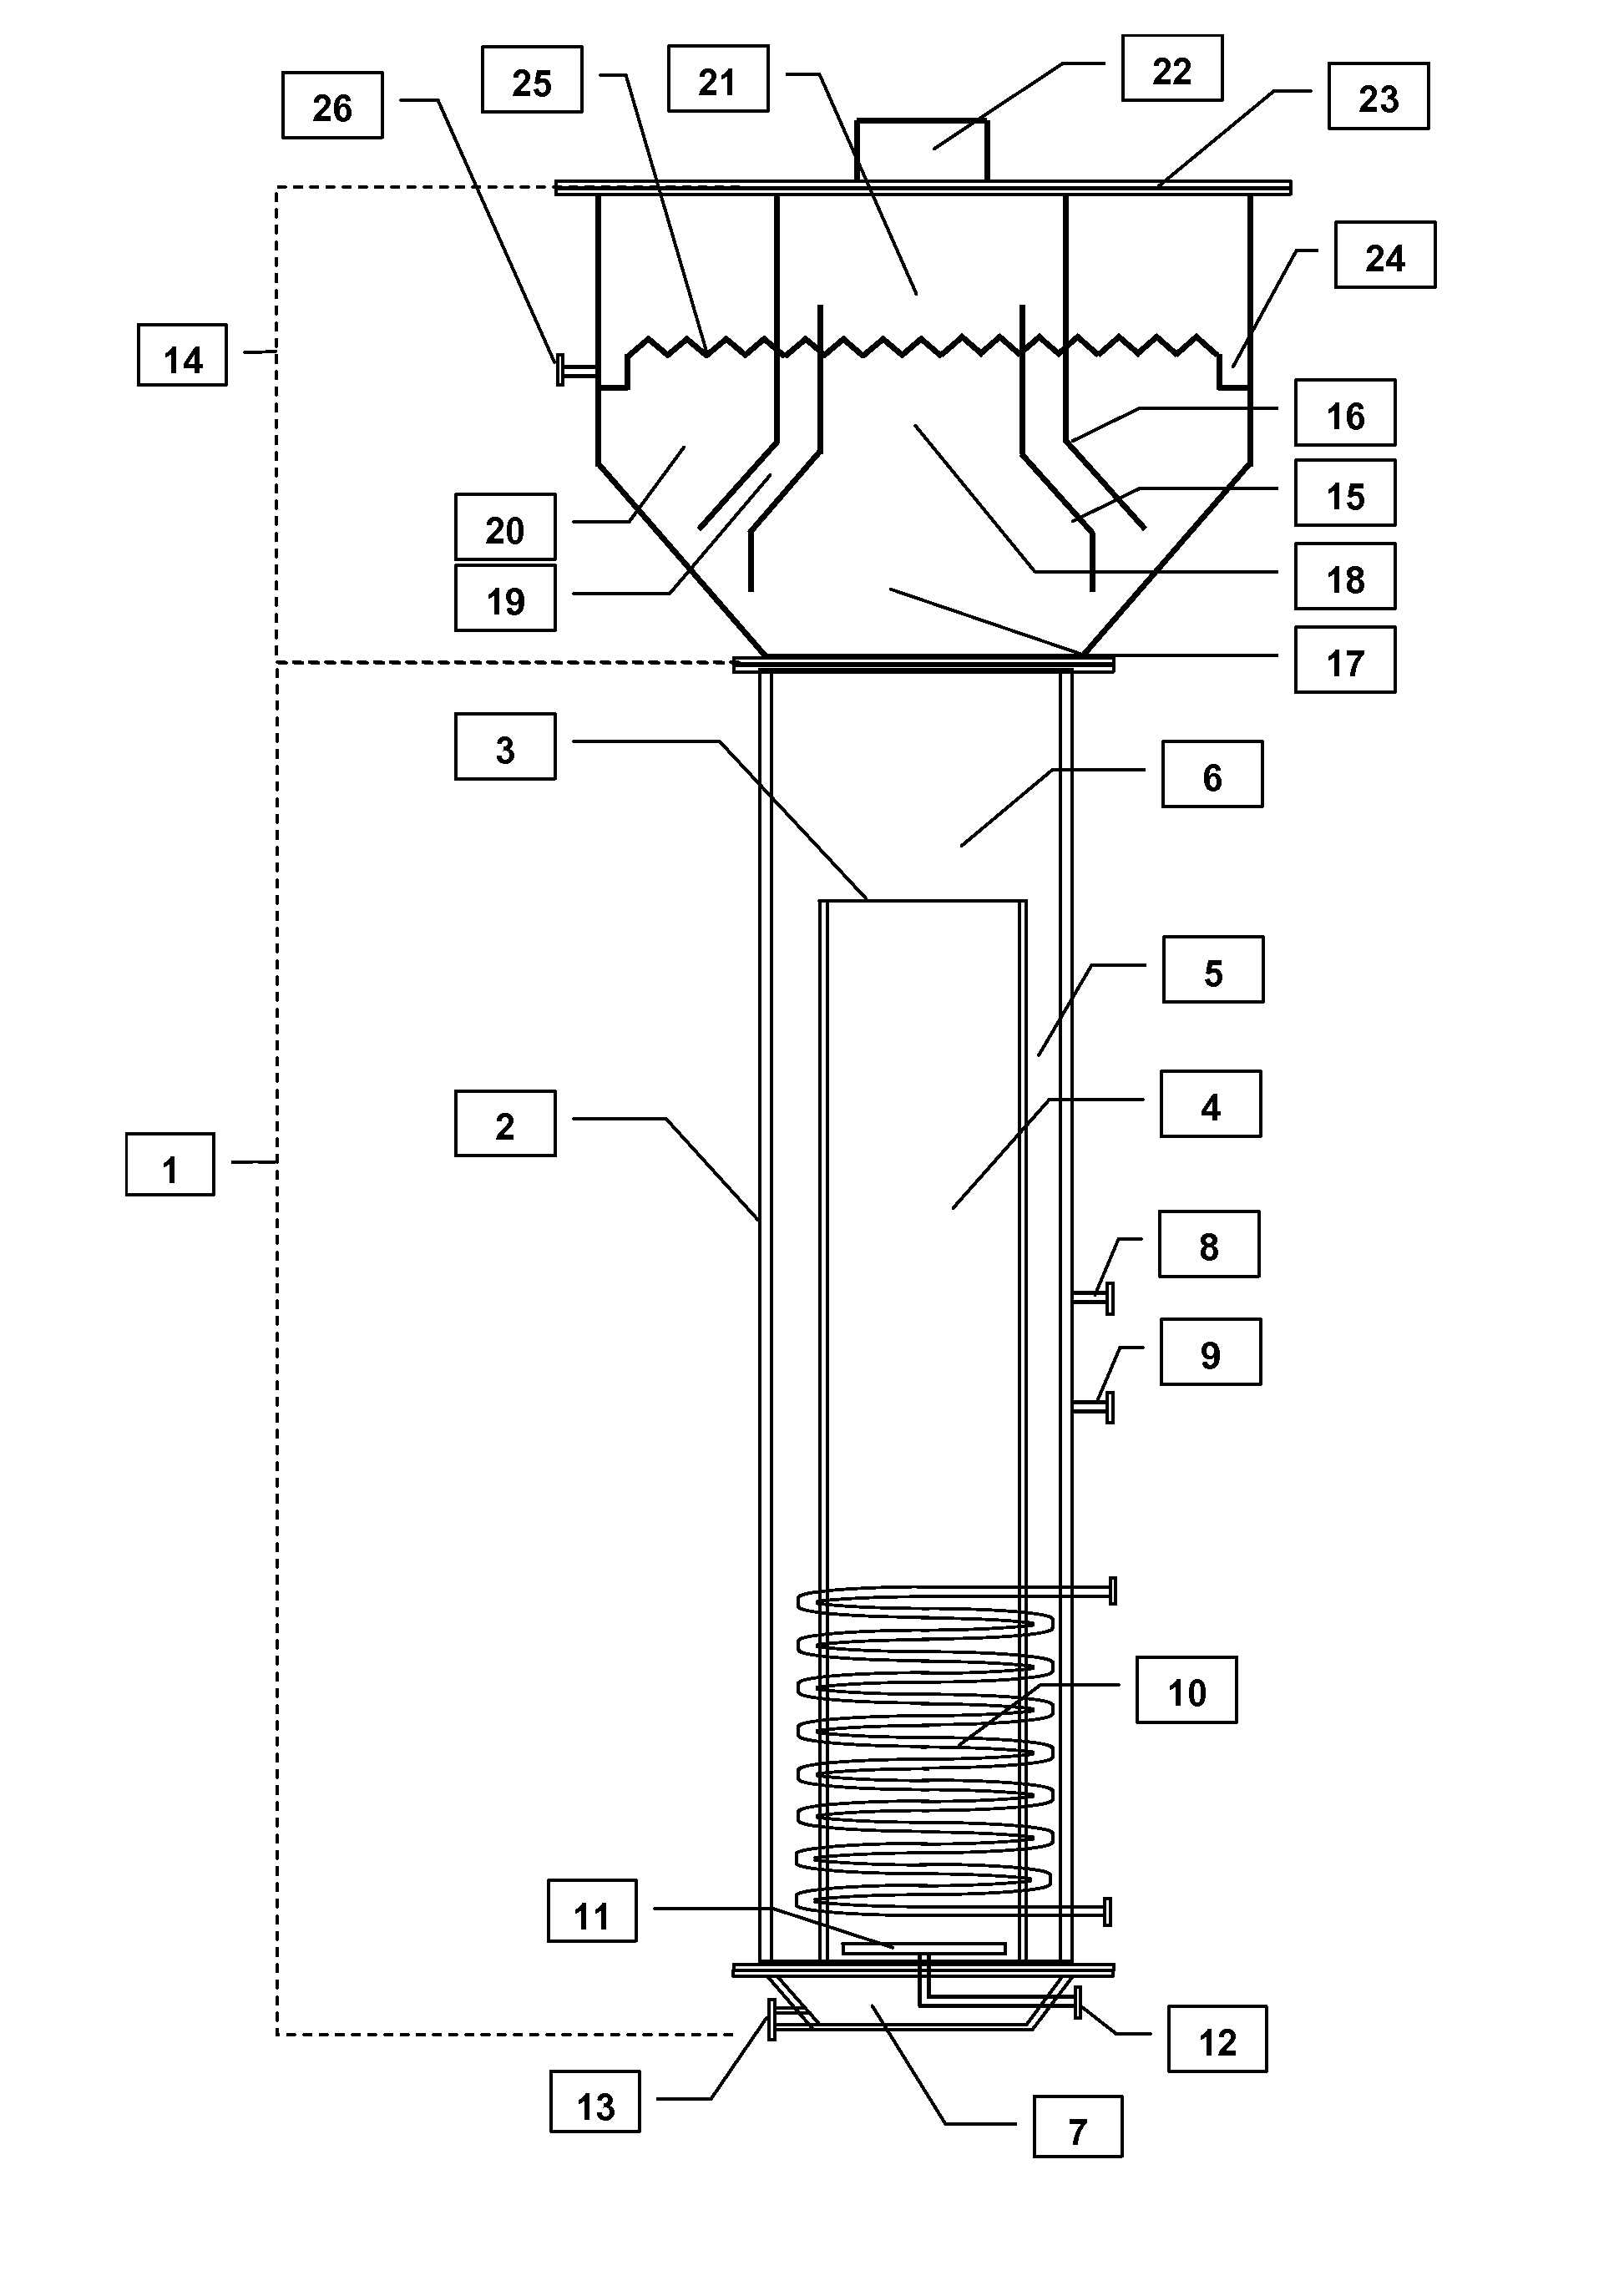 Bioreactor for continuous production of bioleaching solutions for inoculation and irrigation of sulfide-ore bioleaching heaps and dumps